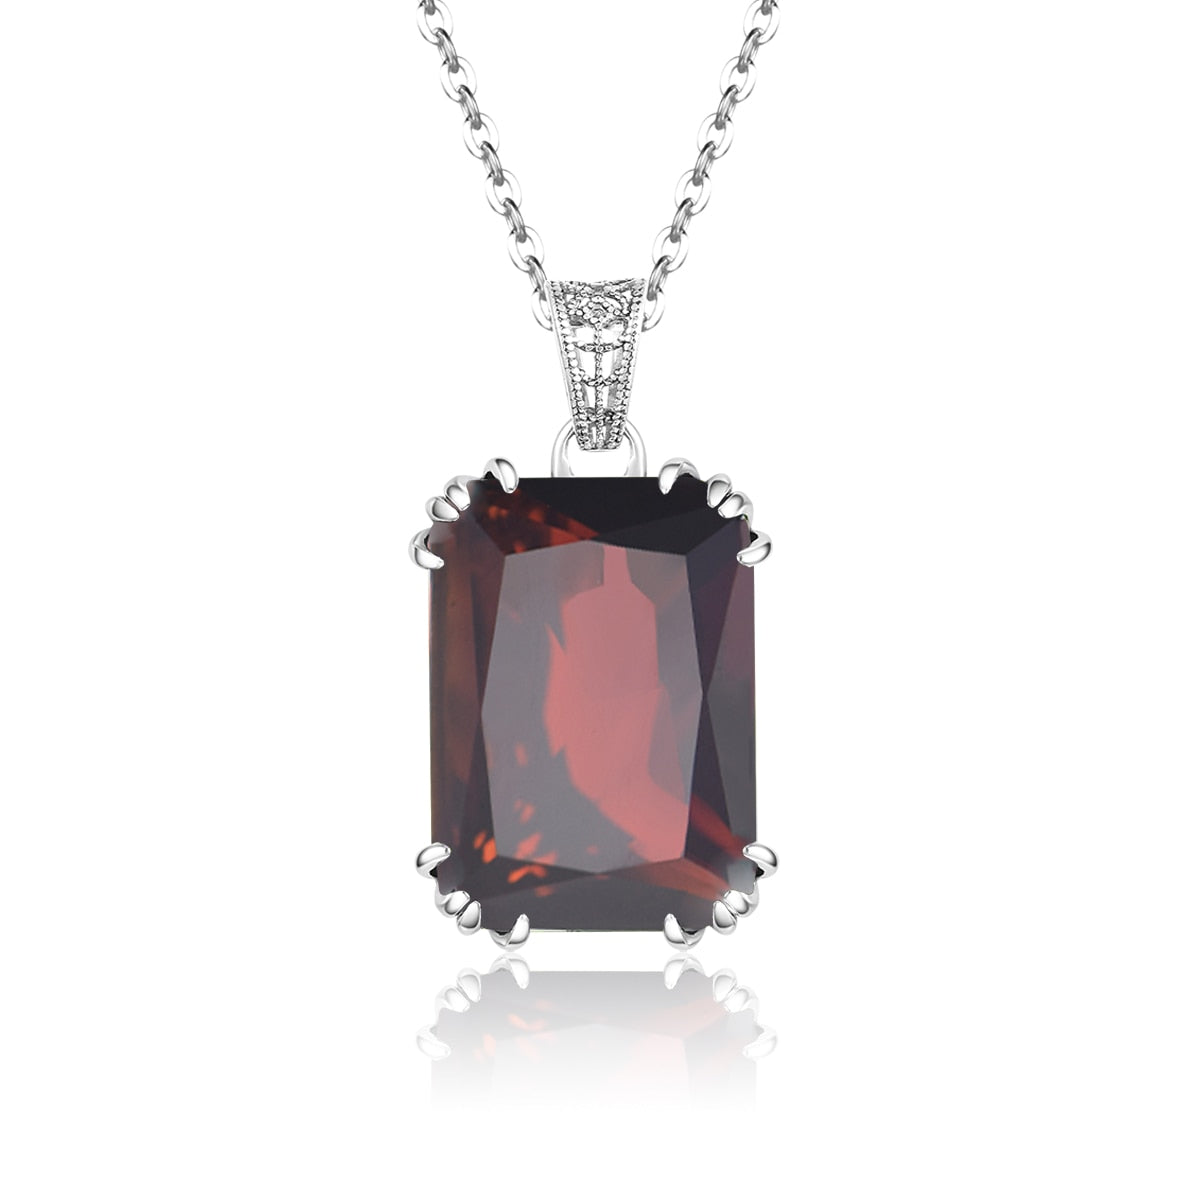 100% Real 925 Sterling Silver Fine Jewelry Necklace Square Garnet Classic Slide Pendants For Women Accessories Silver 925 Gifts Garnet